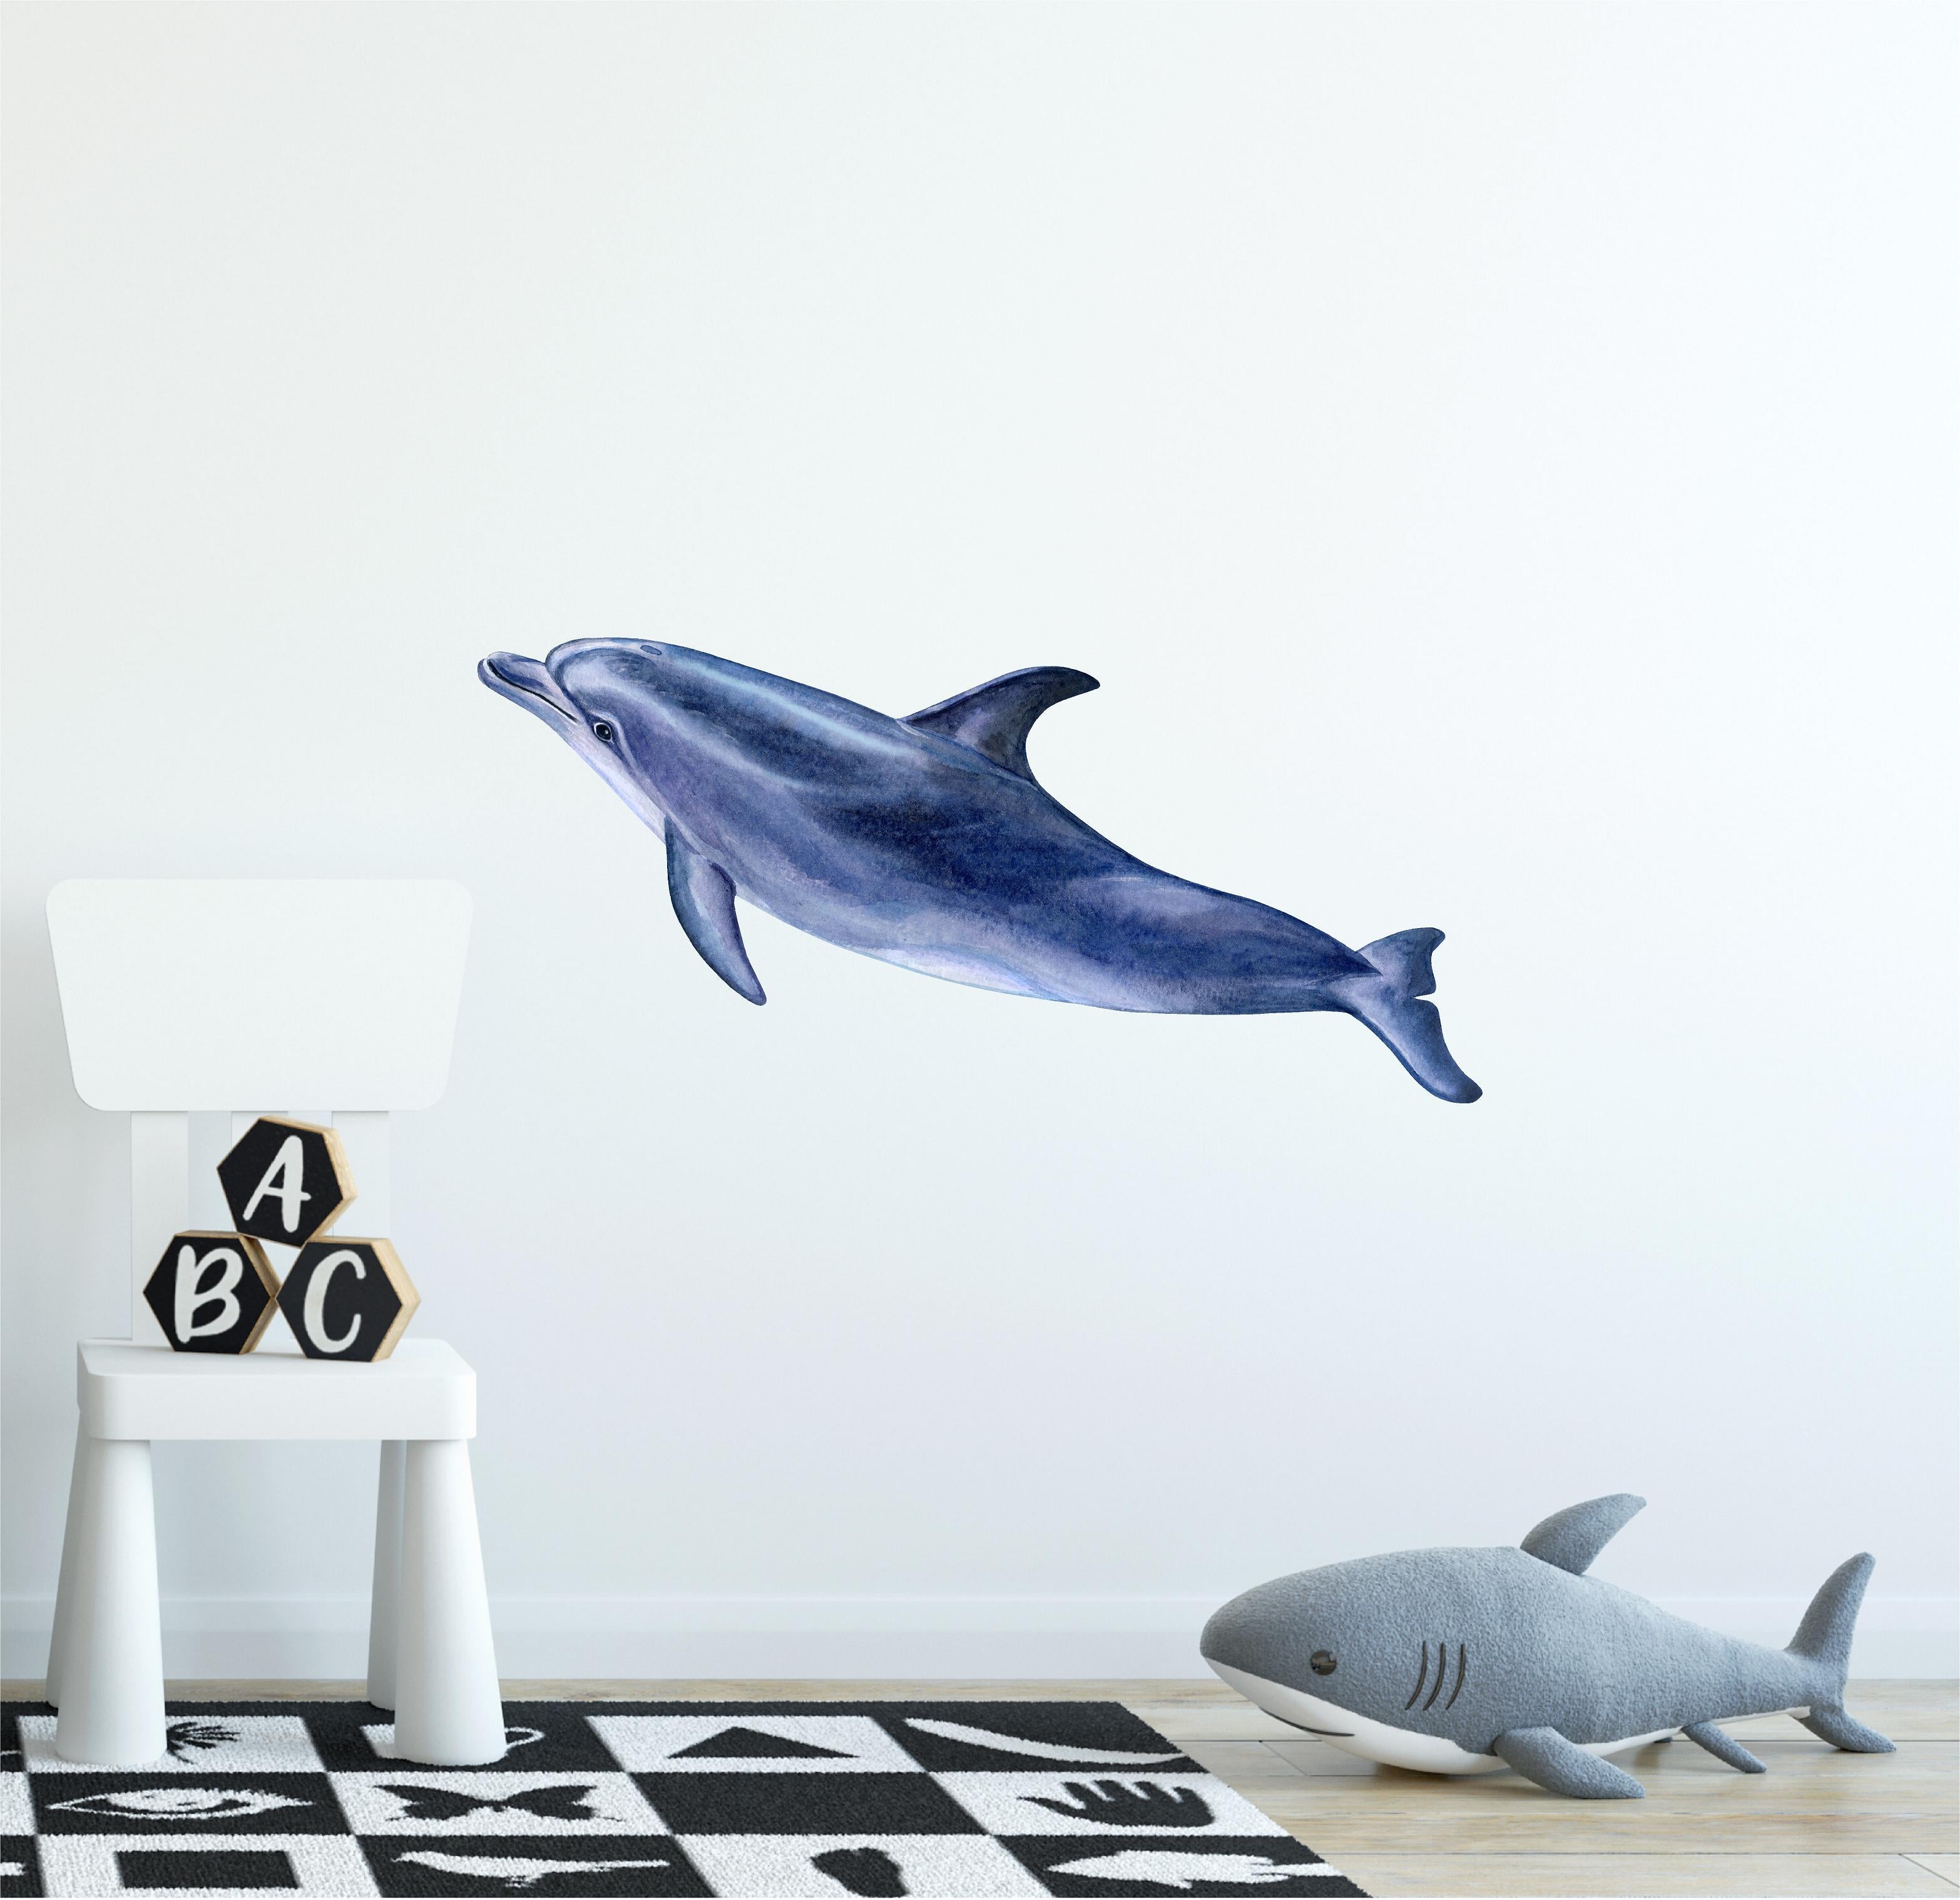 Dolphin #4 Wall Decal Ocean Sea Life Removable Fabric Wall Sticker | DecalBaby